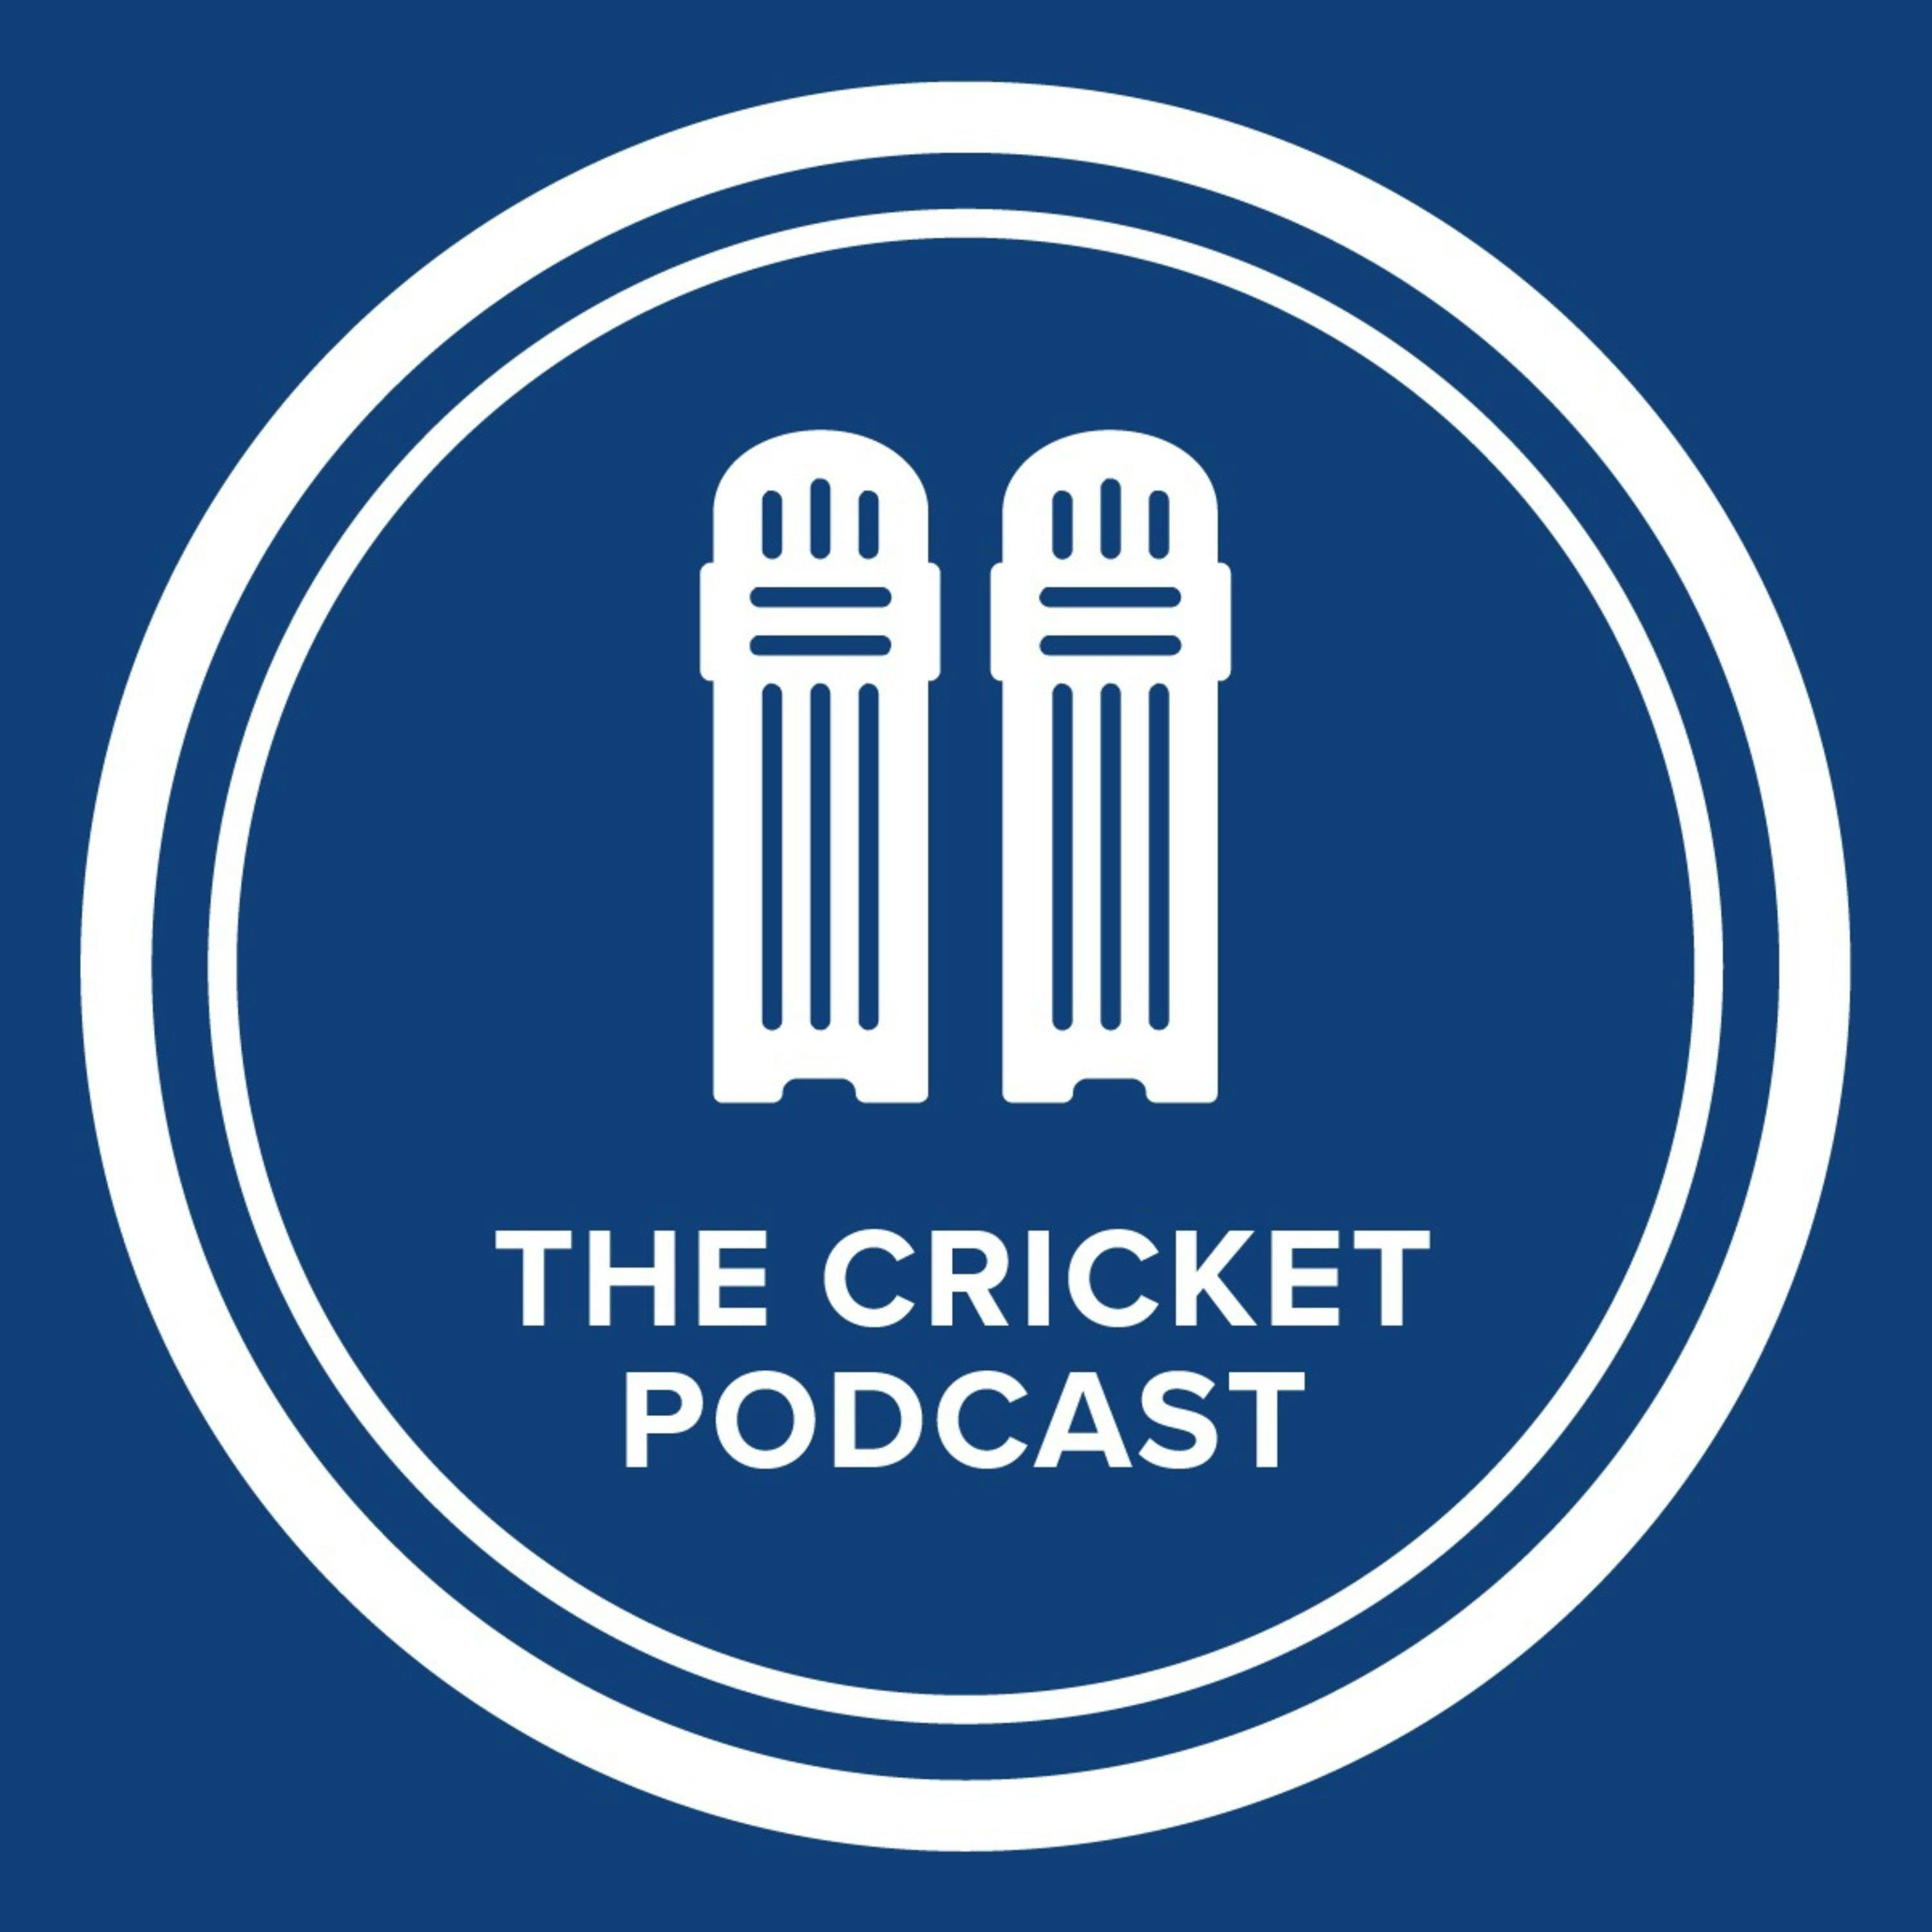 England v India - Second Test - Day 3 - Who Is On Top At Lords? (feat. Dan Weston)